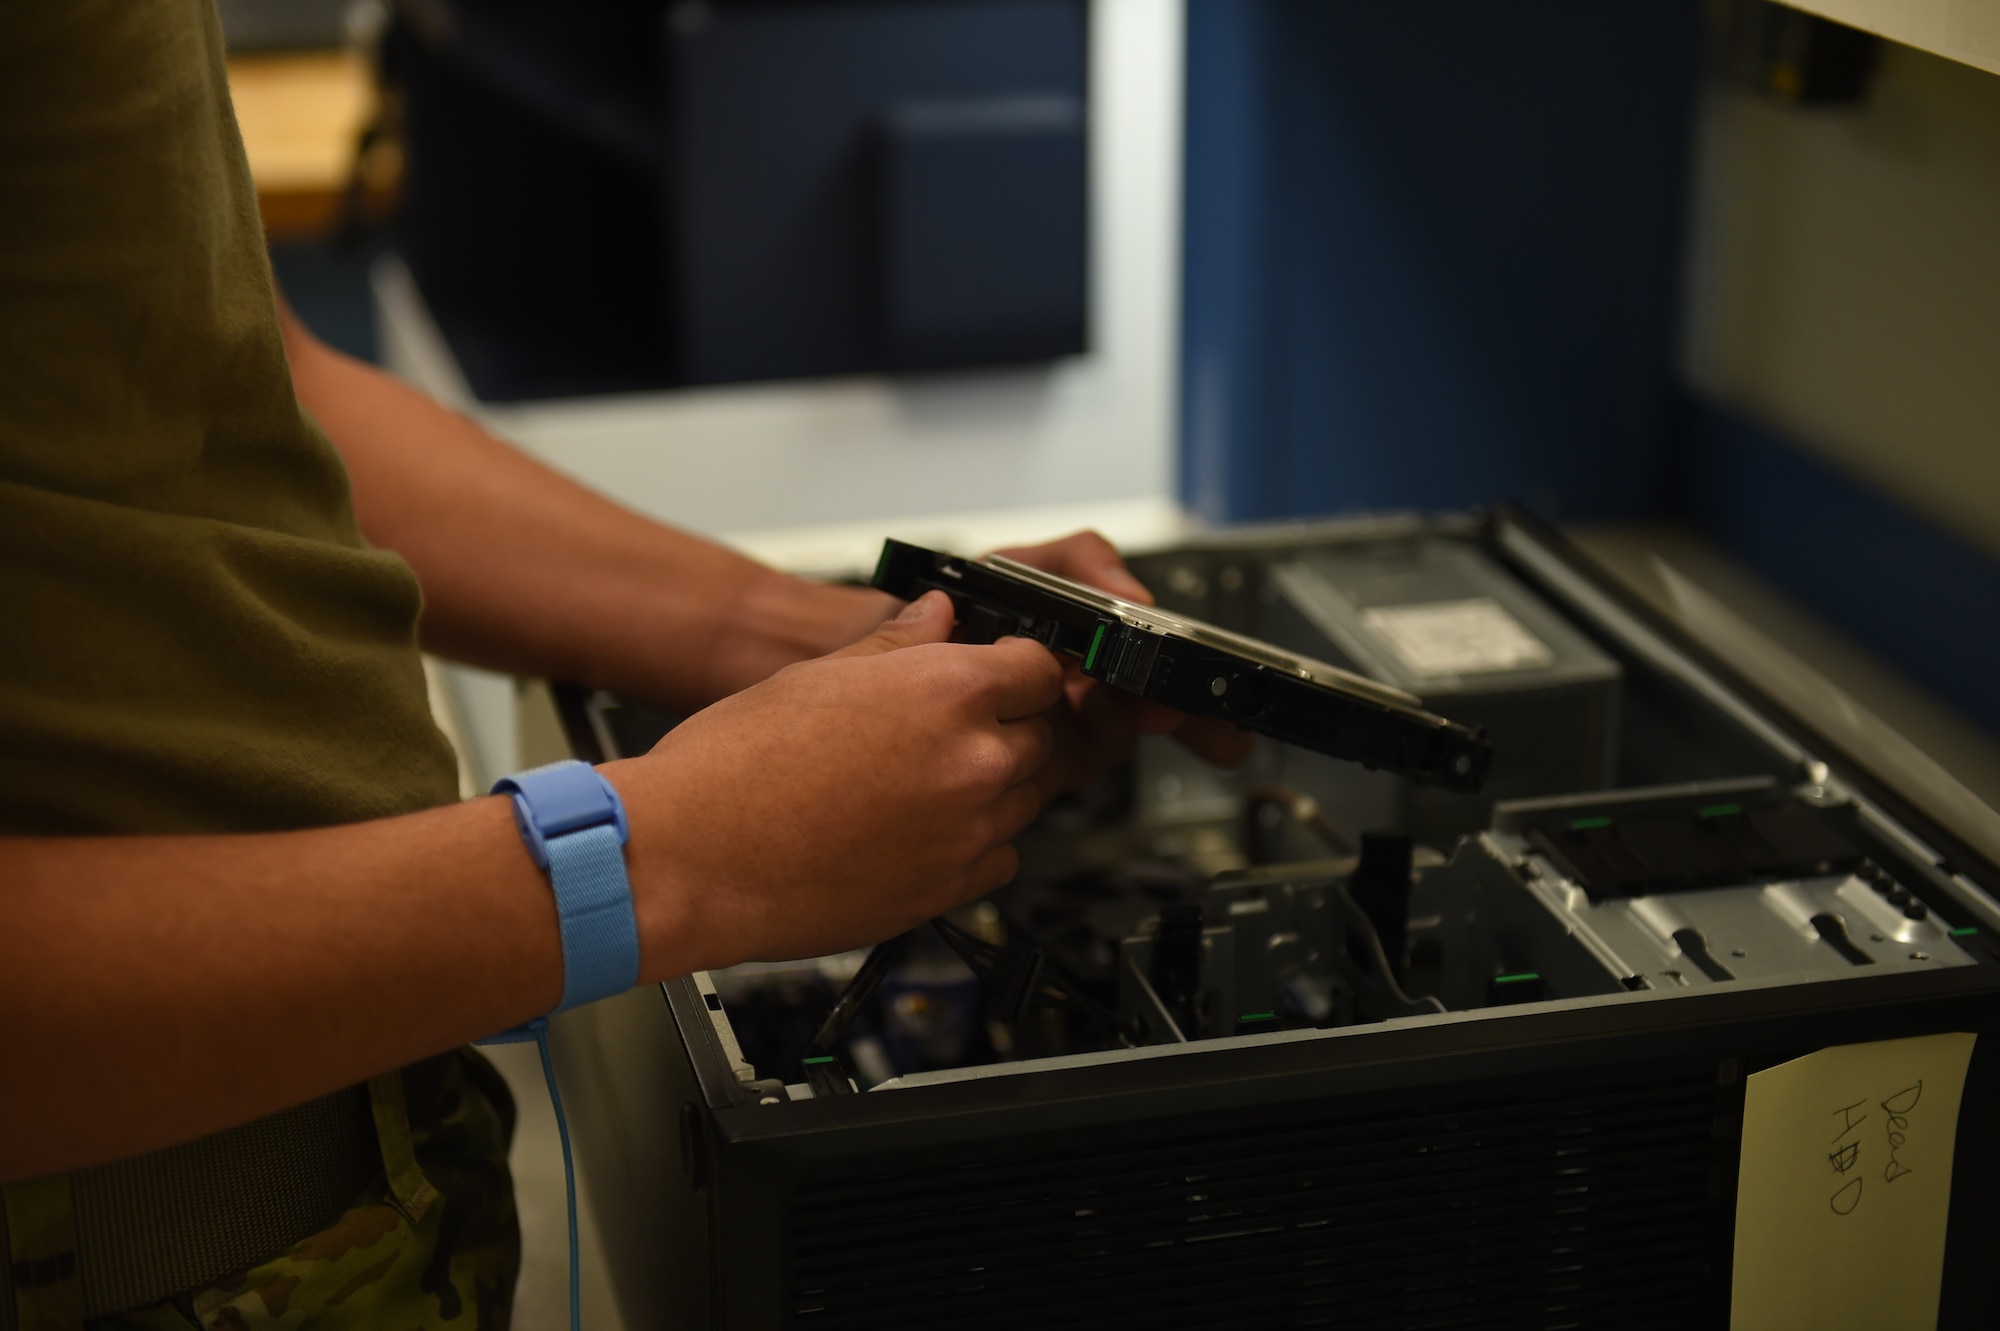 Airman Daniel Artrip, 627th Communications Squadron client systems technician, examines a hard drive in a broken computer on Joint Base Lewis-McChord, Wash., Oct. 22, 2020. Client systems technicians troubleshoot computer issues for different units across the base. (U.S. Air Force photo by Airman 1st Class Mikayla Heineck)